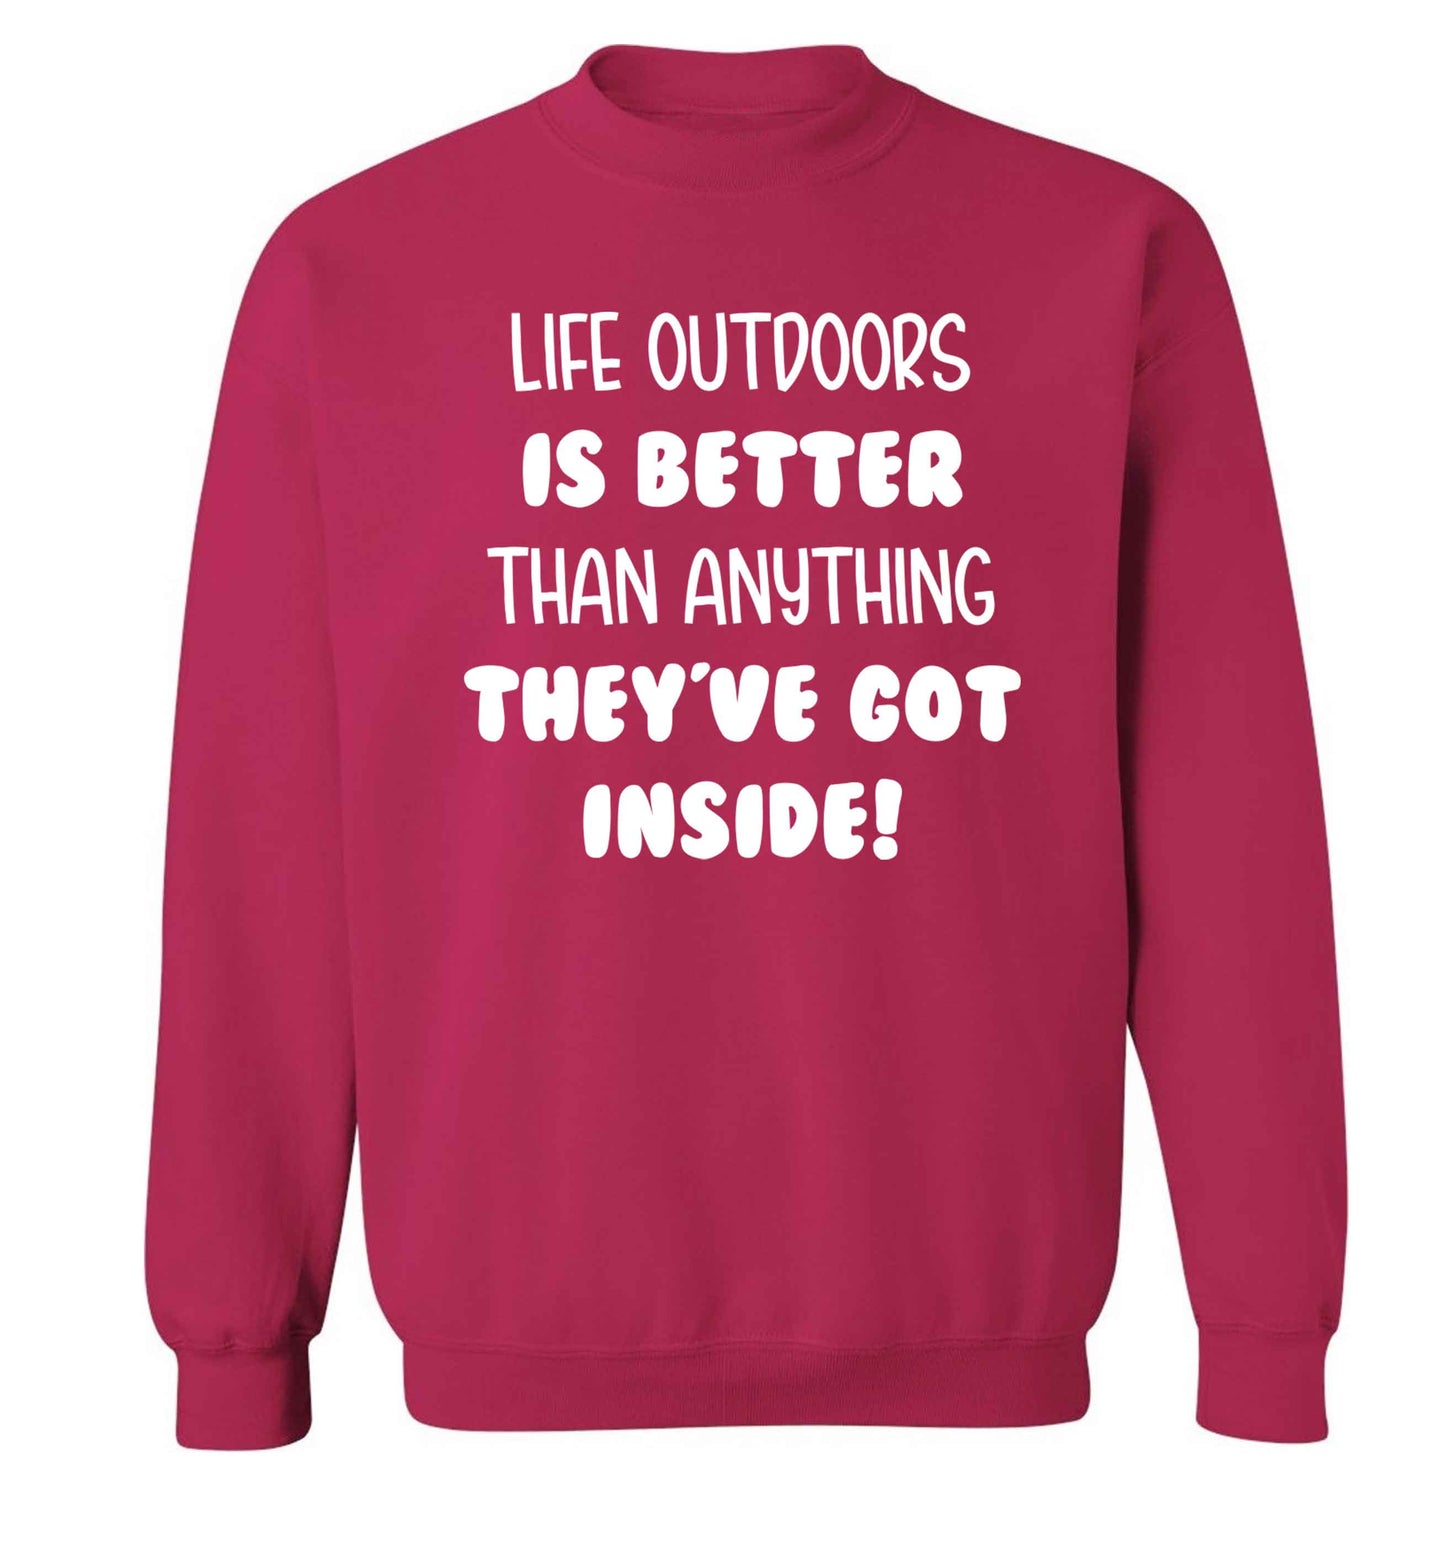 Life outdoors is better than anything they've go inside Adult's unisex pink Sweater 2XL